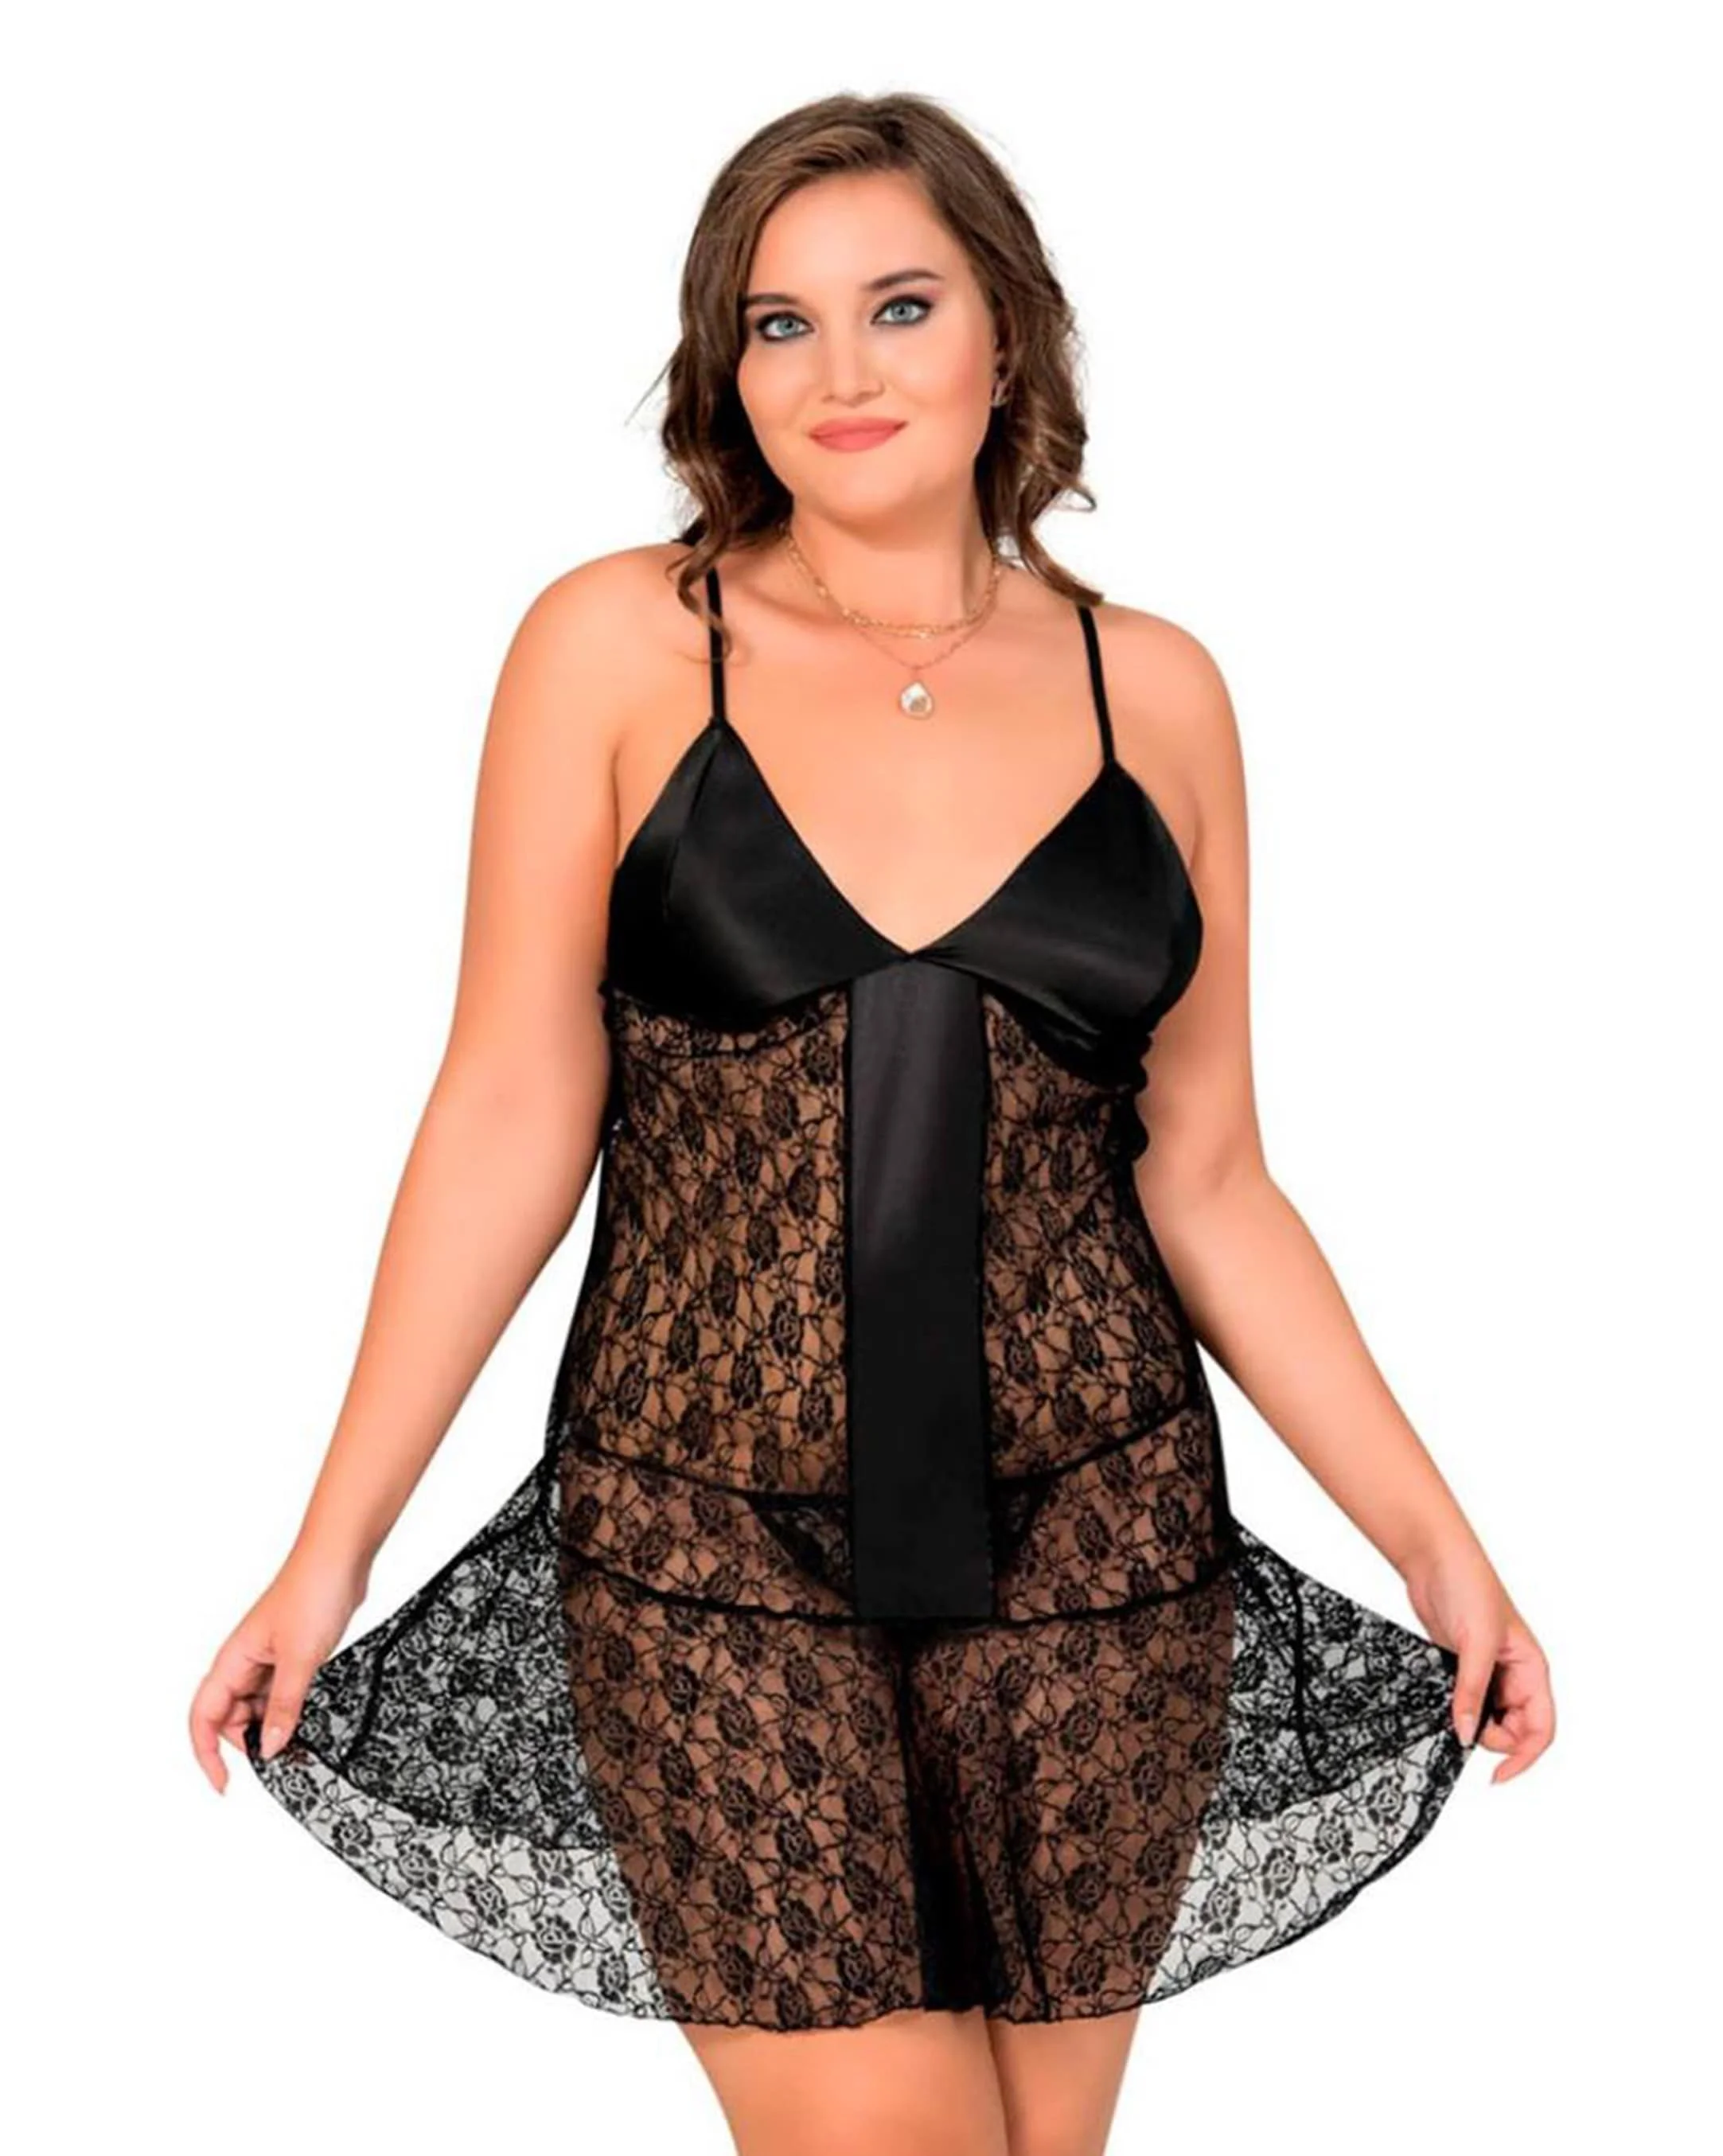 Sheer Lingerie, Black Lingerie for Ladies, Womens Lingerie Sleepwear  Outfits Lace Babydoll Plus Size Lingerie Set at  Women's Clothing  store